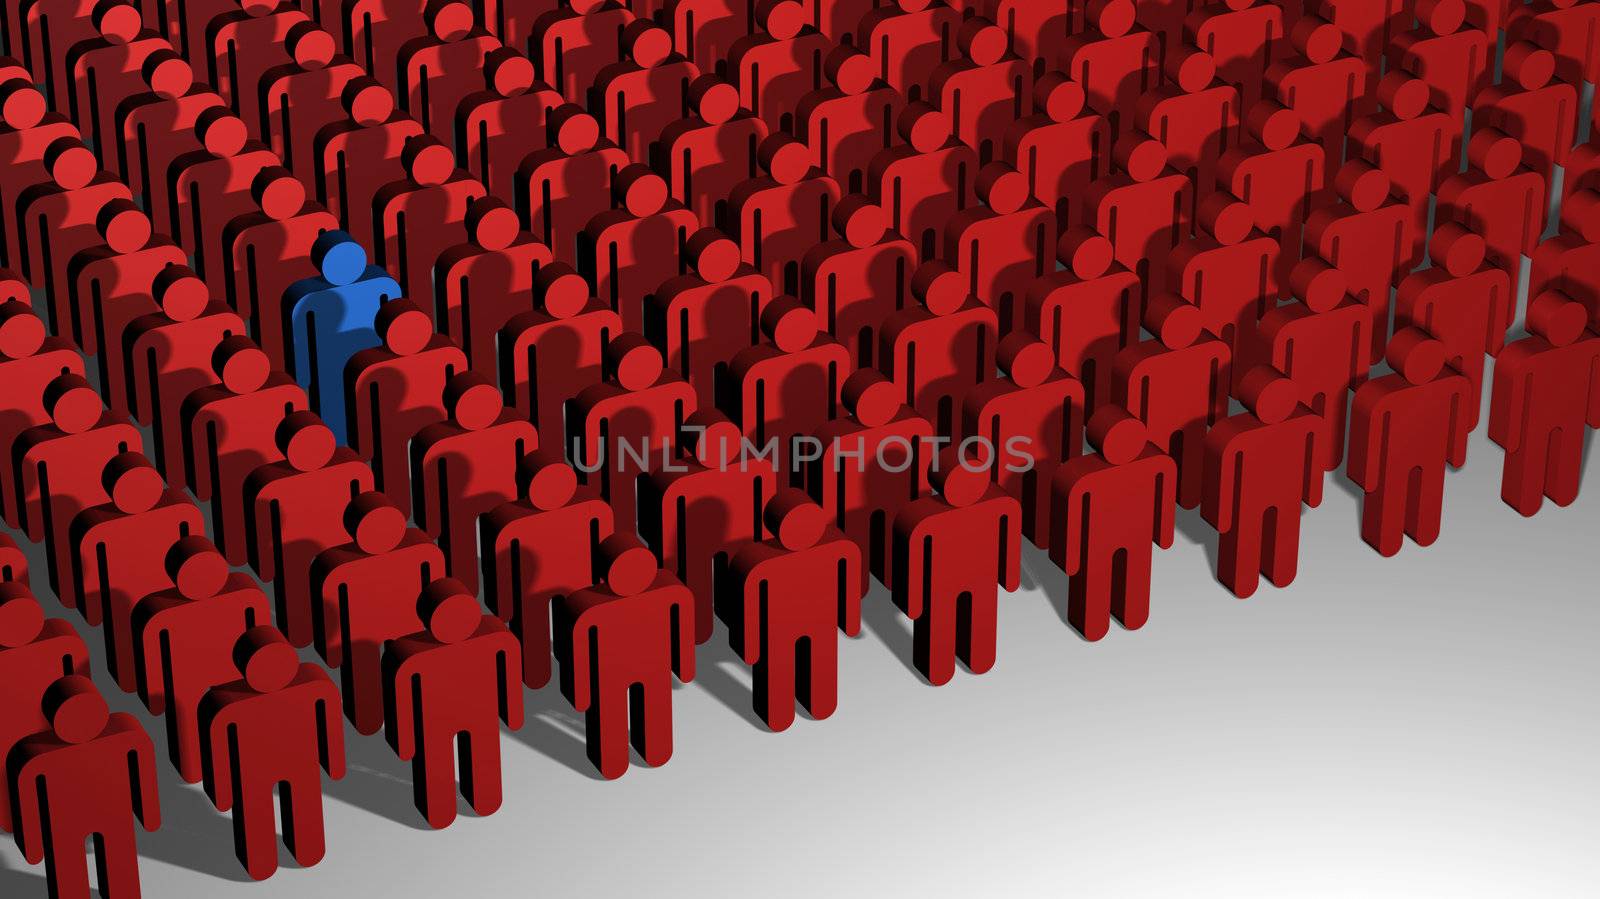 A 3D image of lines of little red people with on standing out from the crowd.